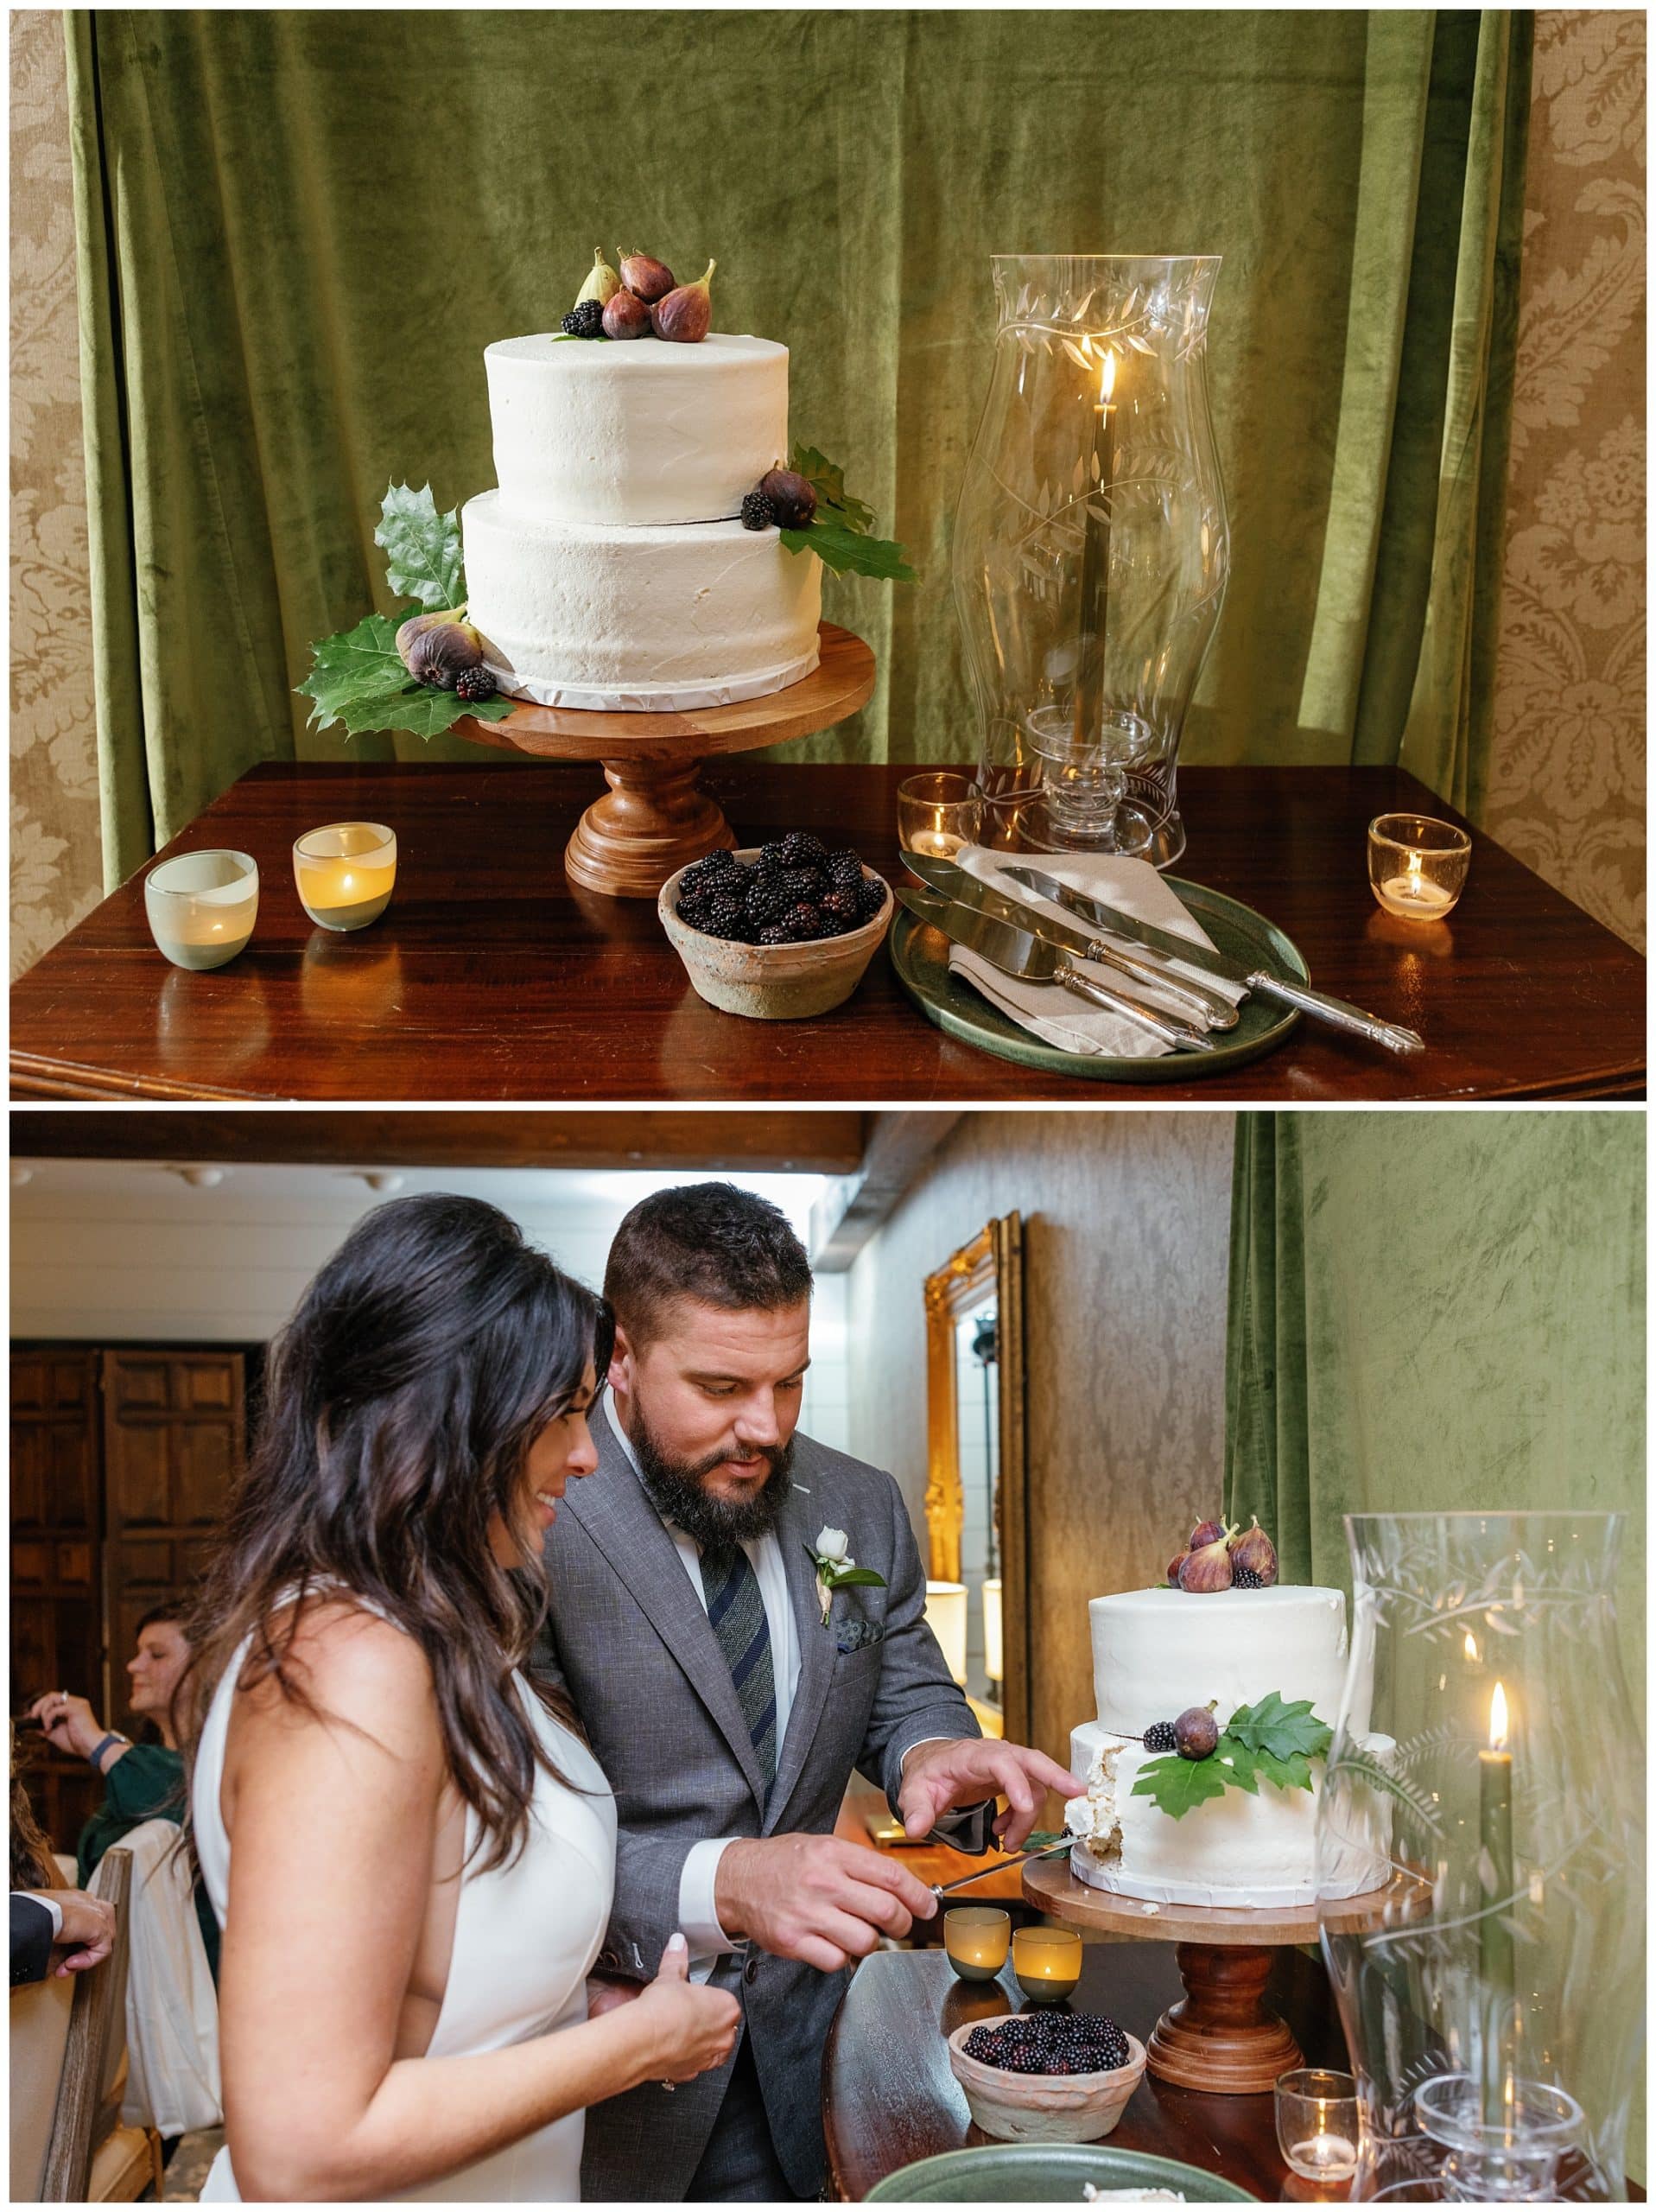 Couple cuts small white wedding cake with fresh figs and blackberries